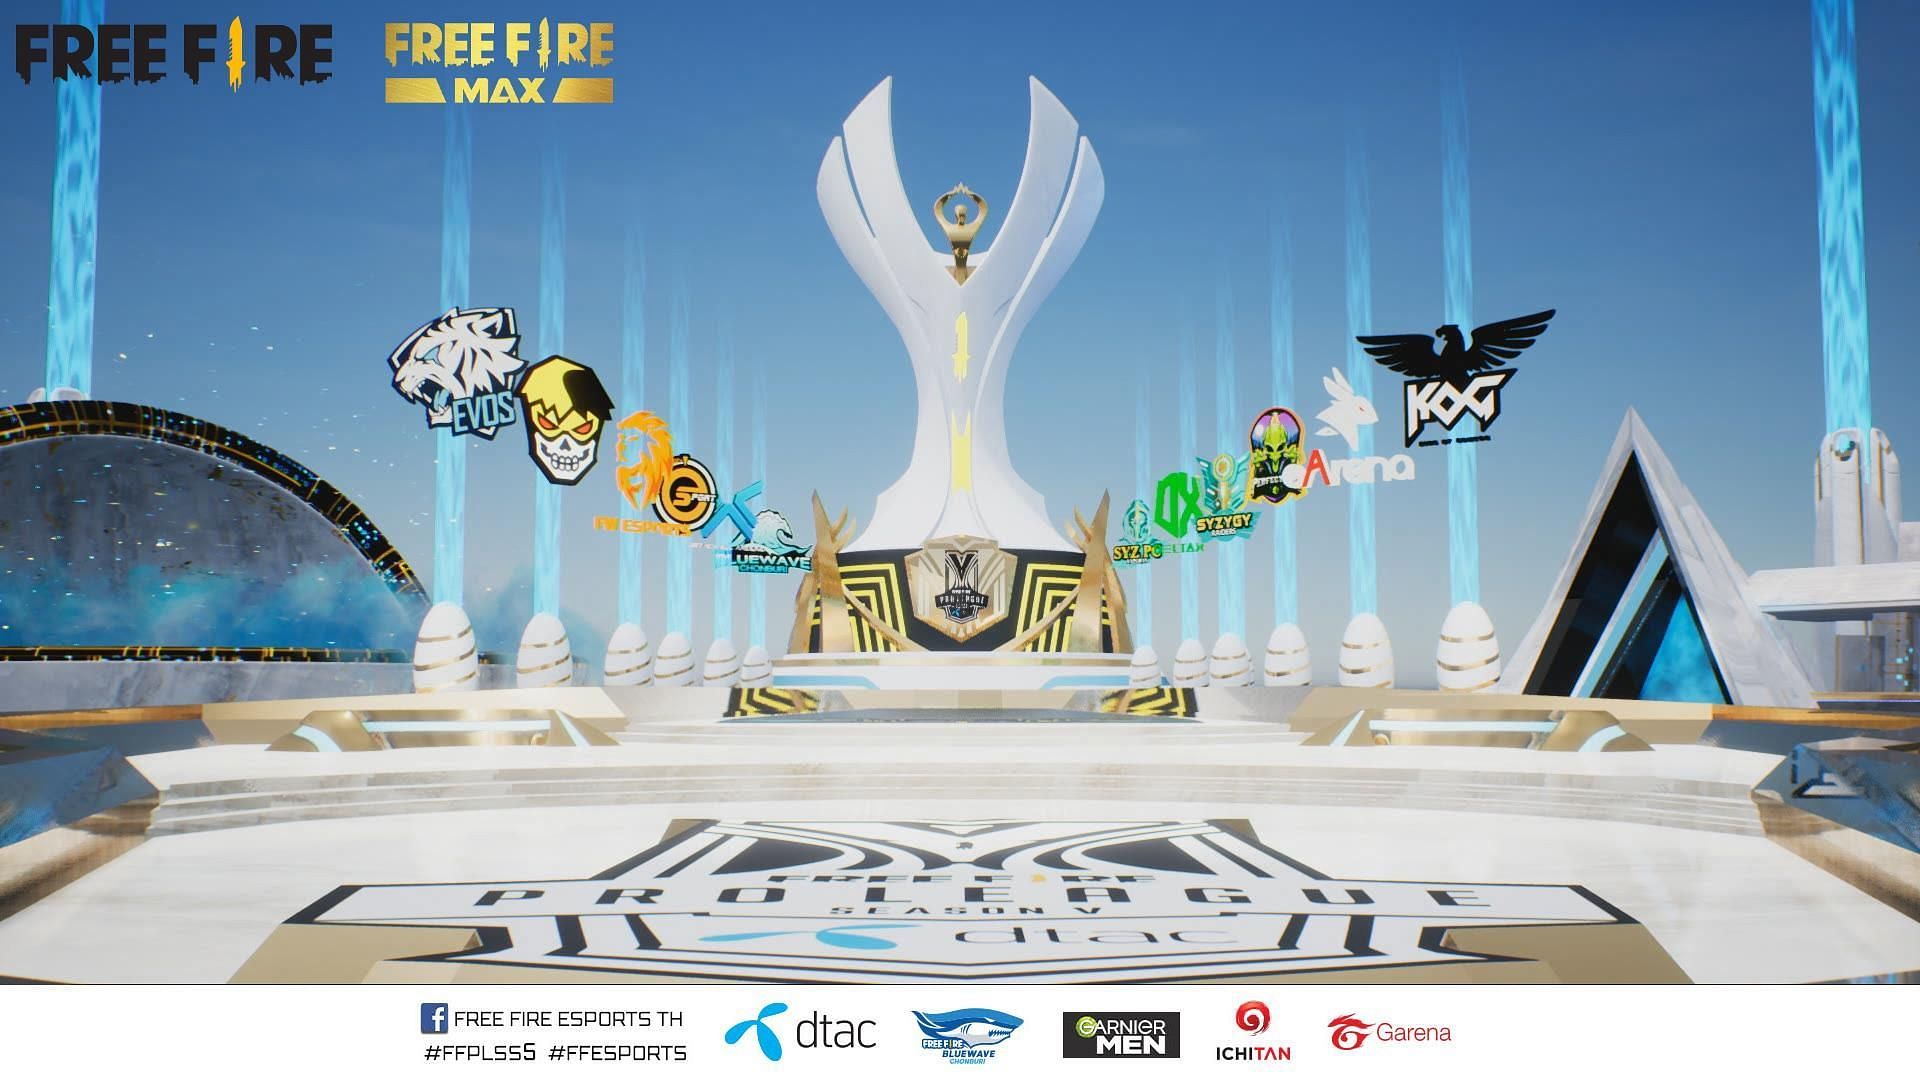 eArena claimed USD 60,655 with their Free Fire Pro League Thailand Season 5 victory